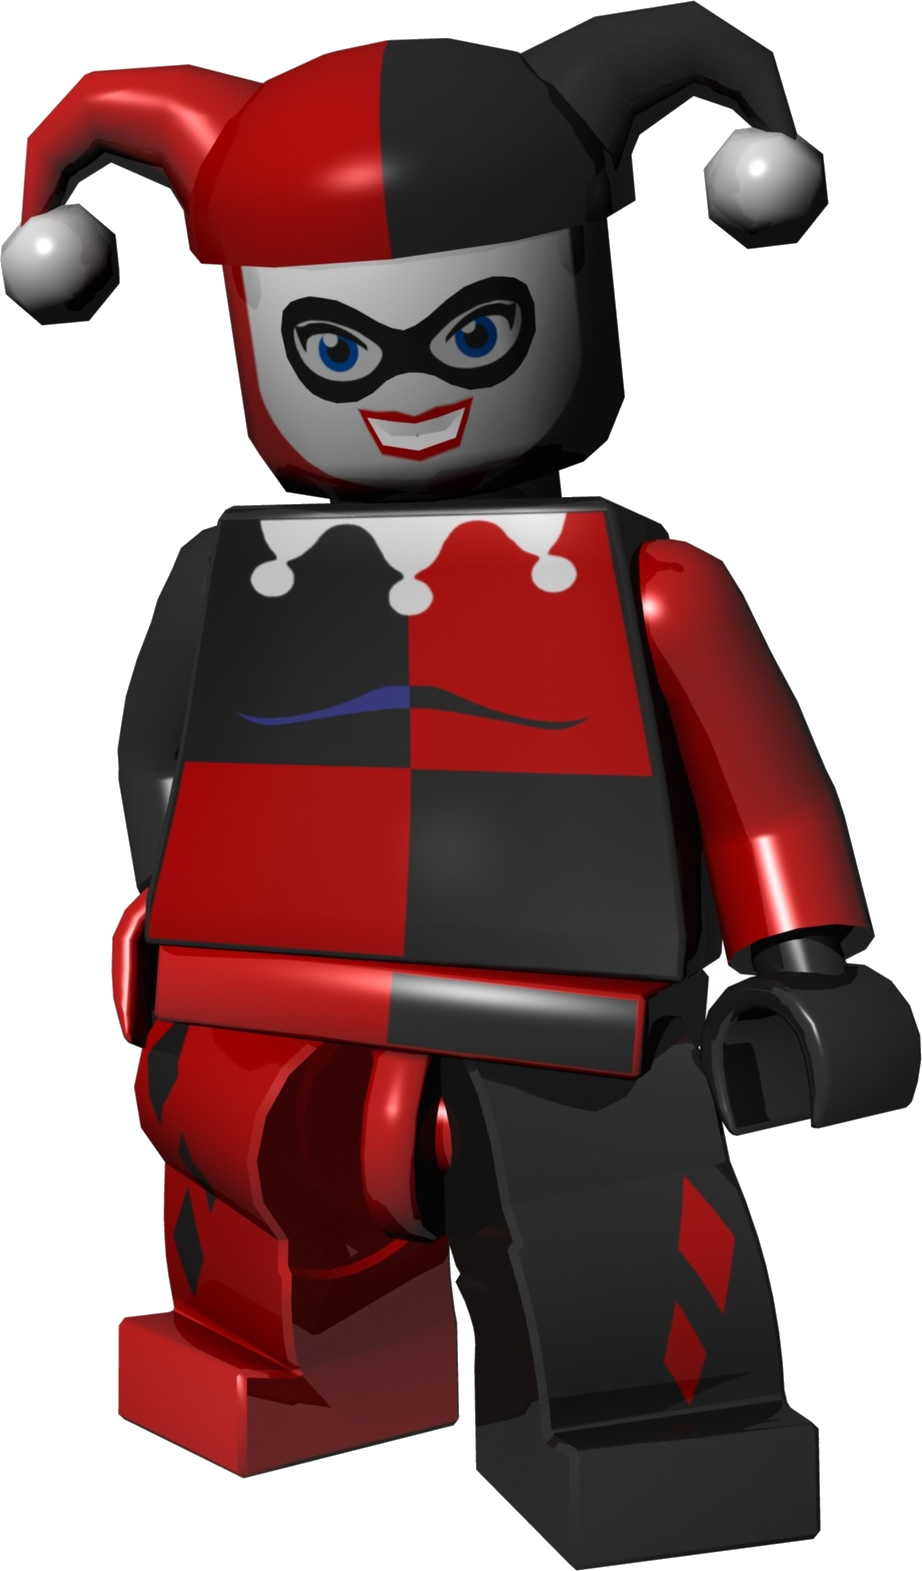 Pictures Of Lego Batman Characters